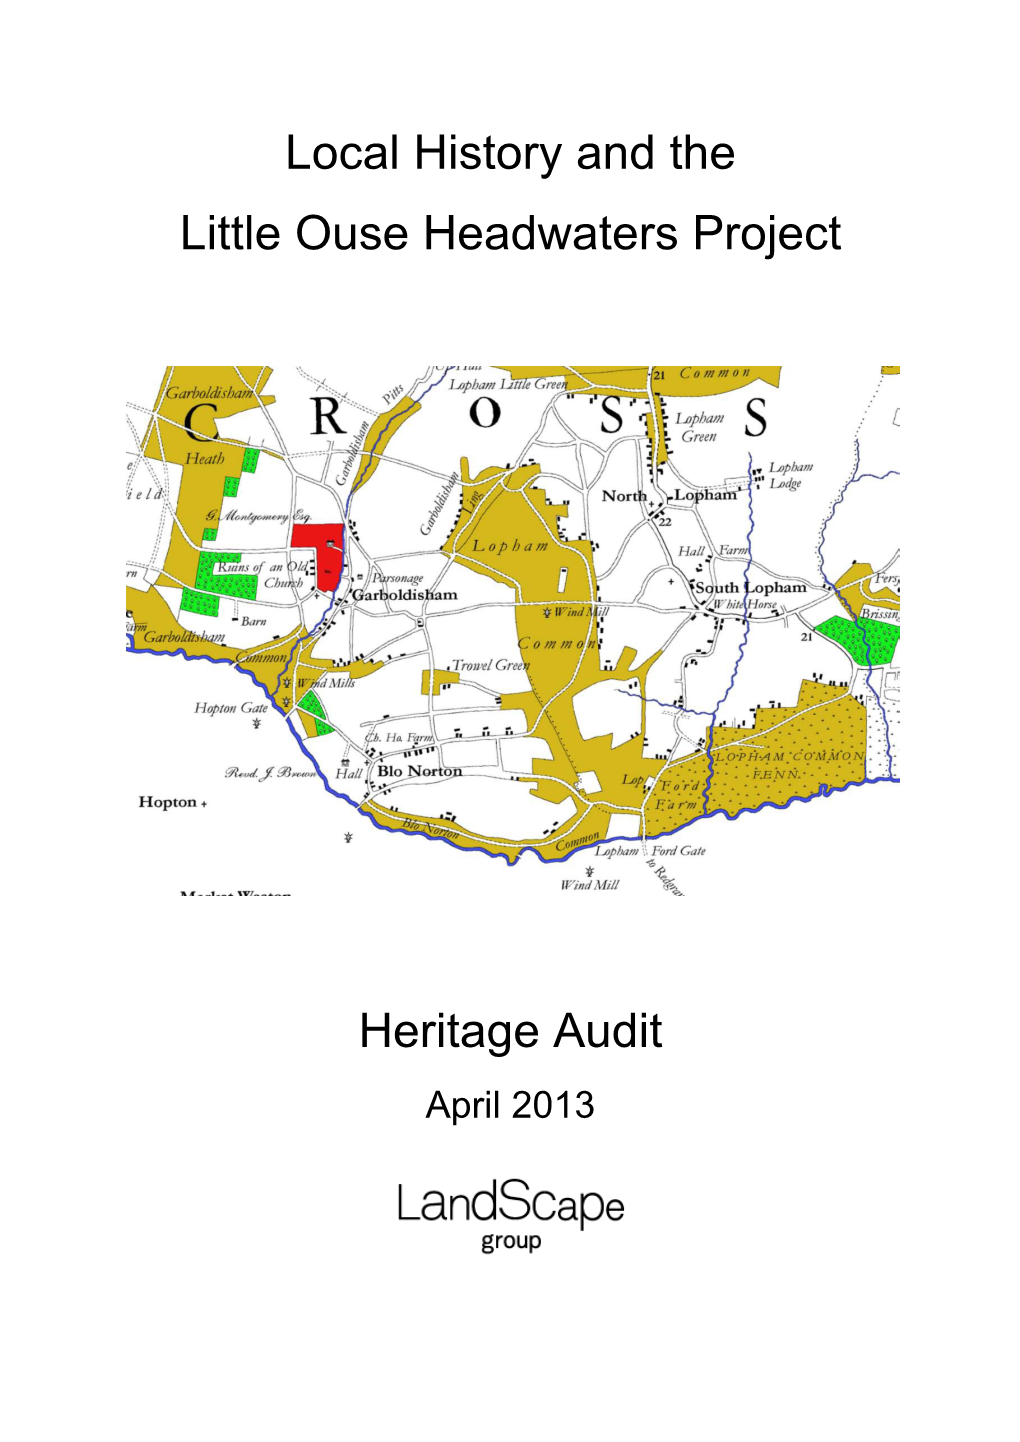 Local History and the Little Ouse Headwaters Project Heritage Audit